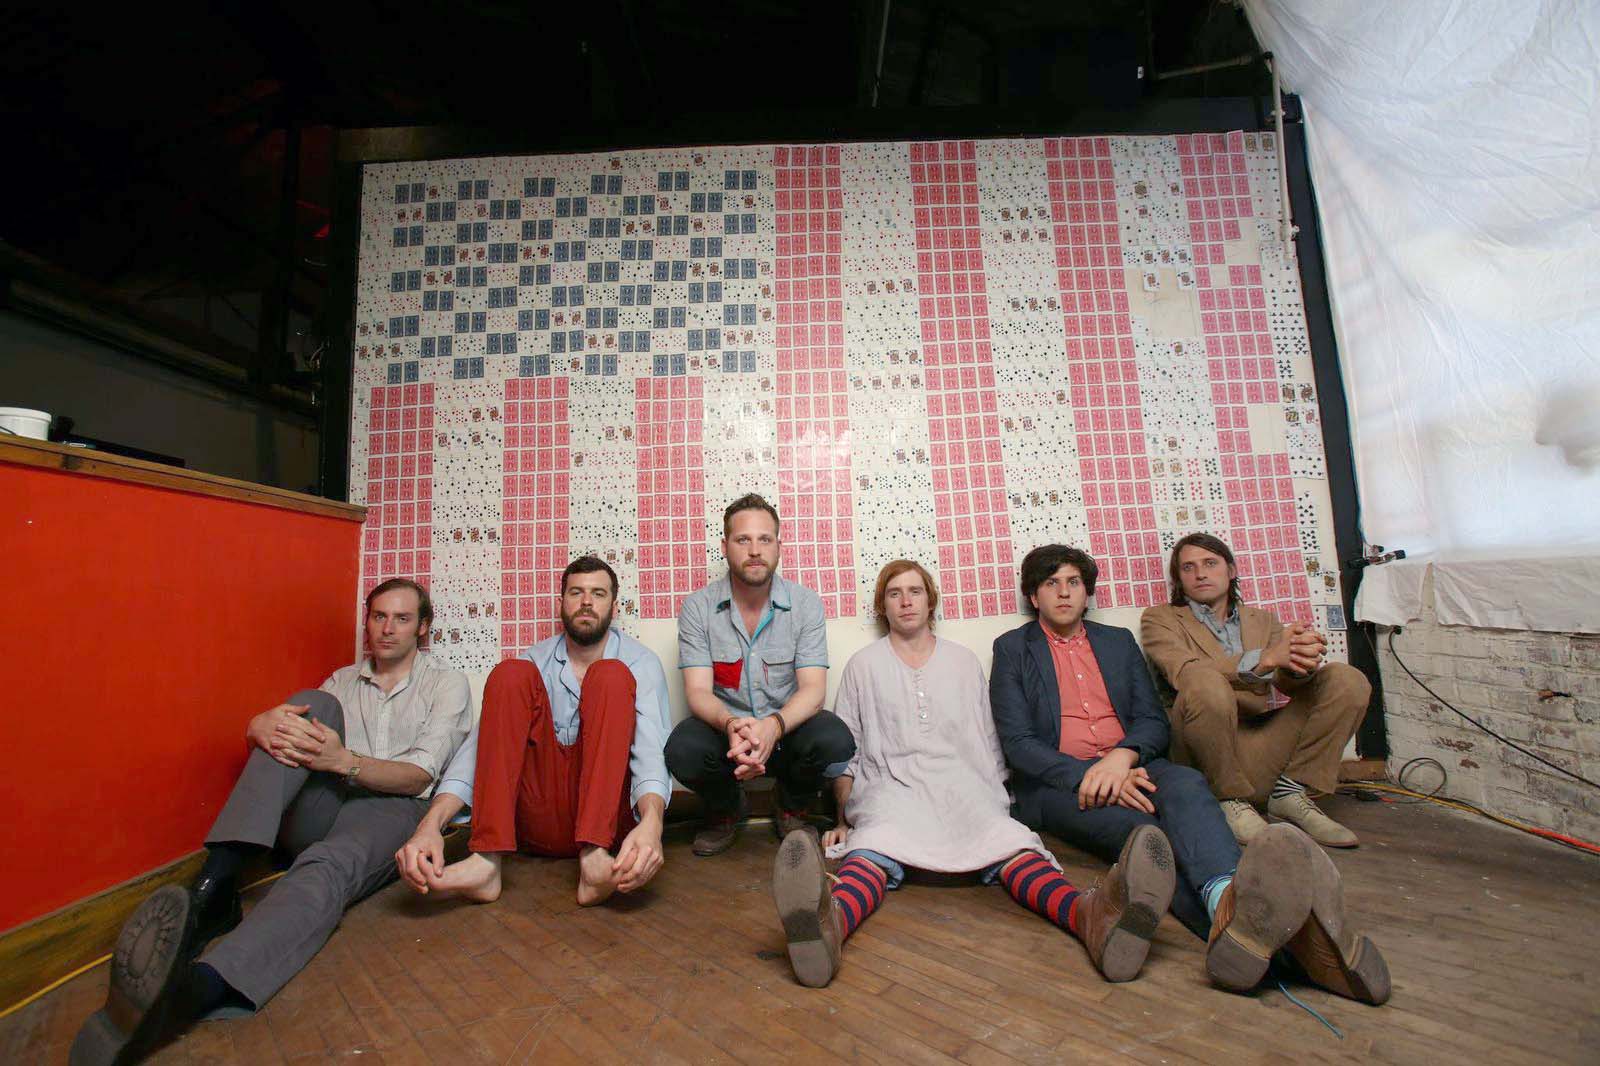 Dr. Dog Wednesday, March 5 For the guys in Philadelphia-based indie-rock group